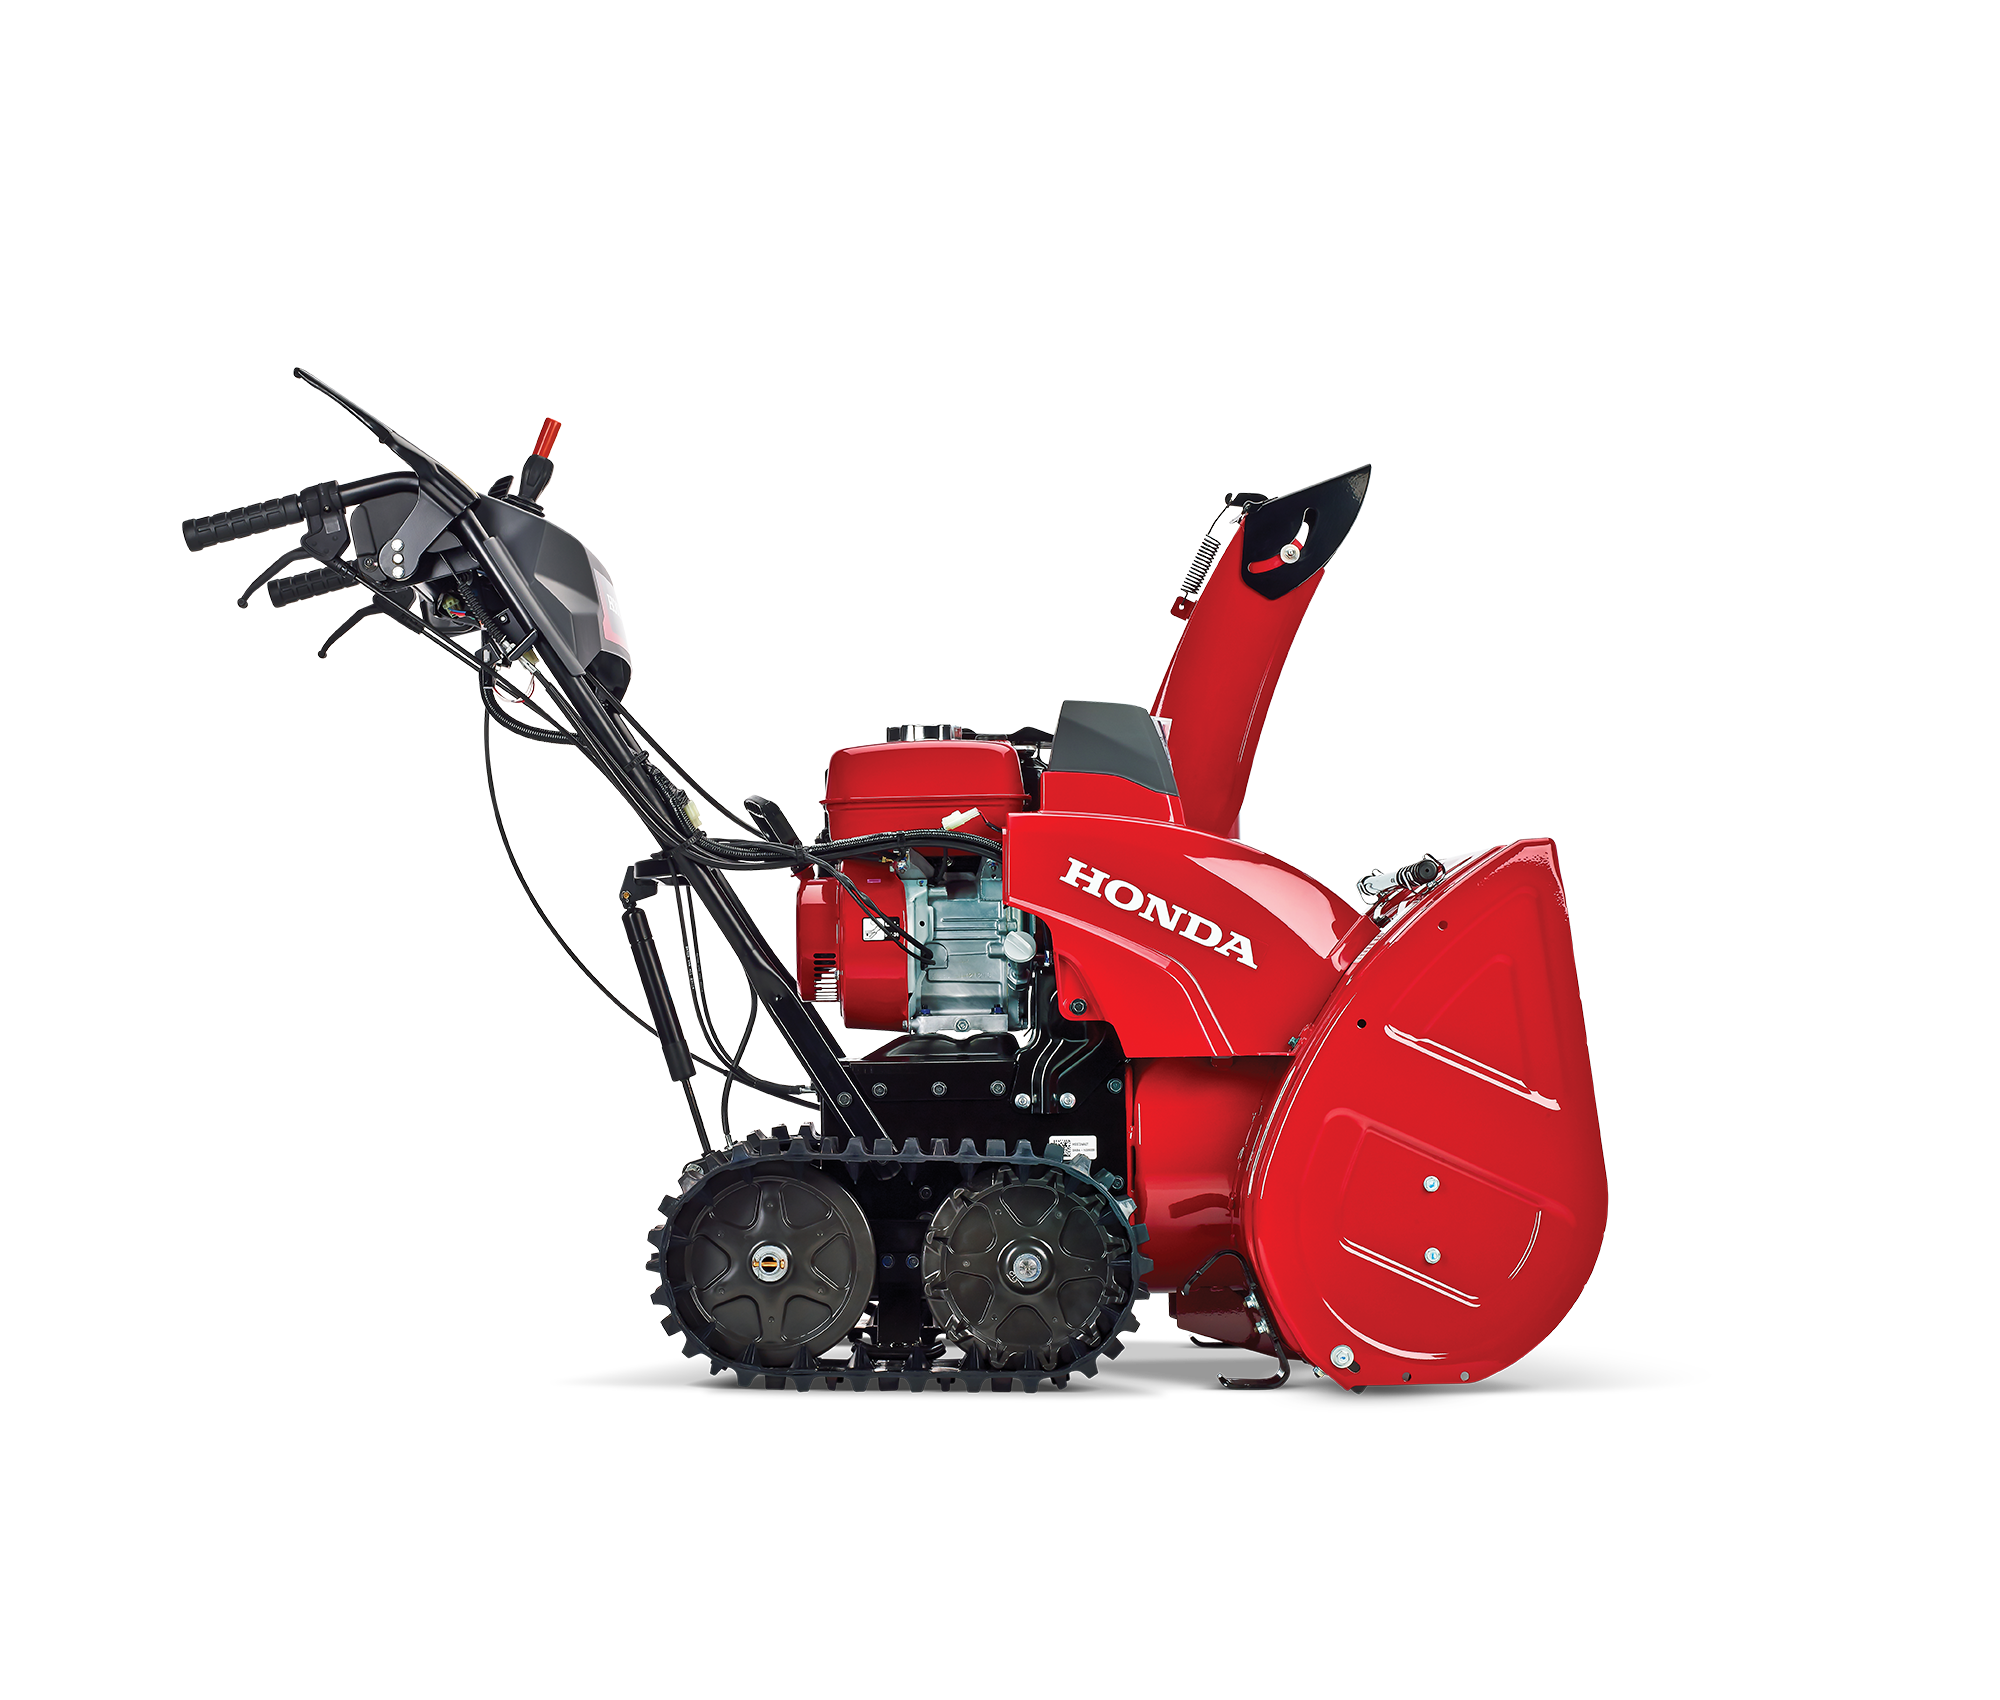 Image of the 24" Track-Drive  Snowblower